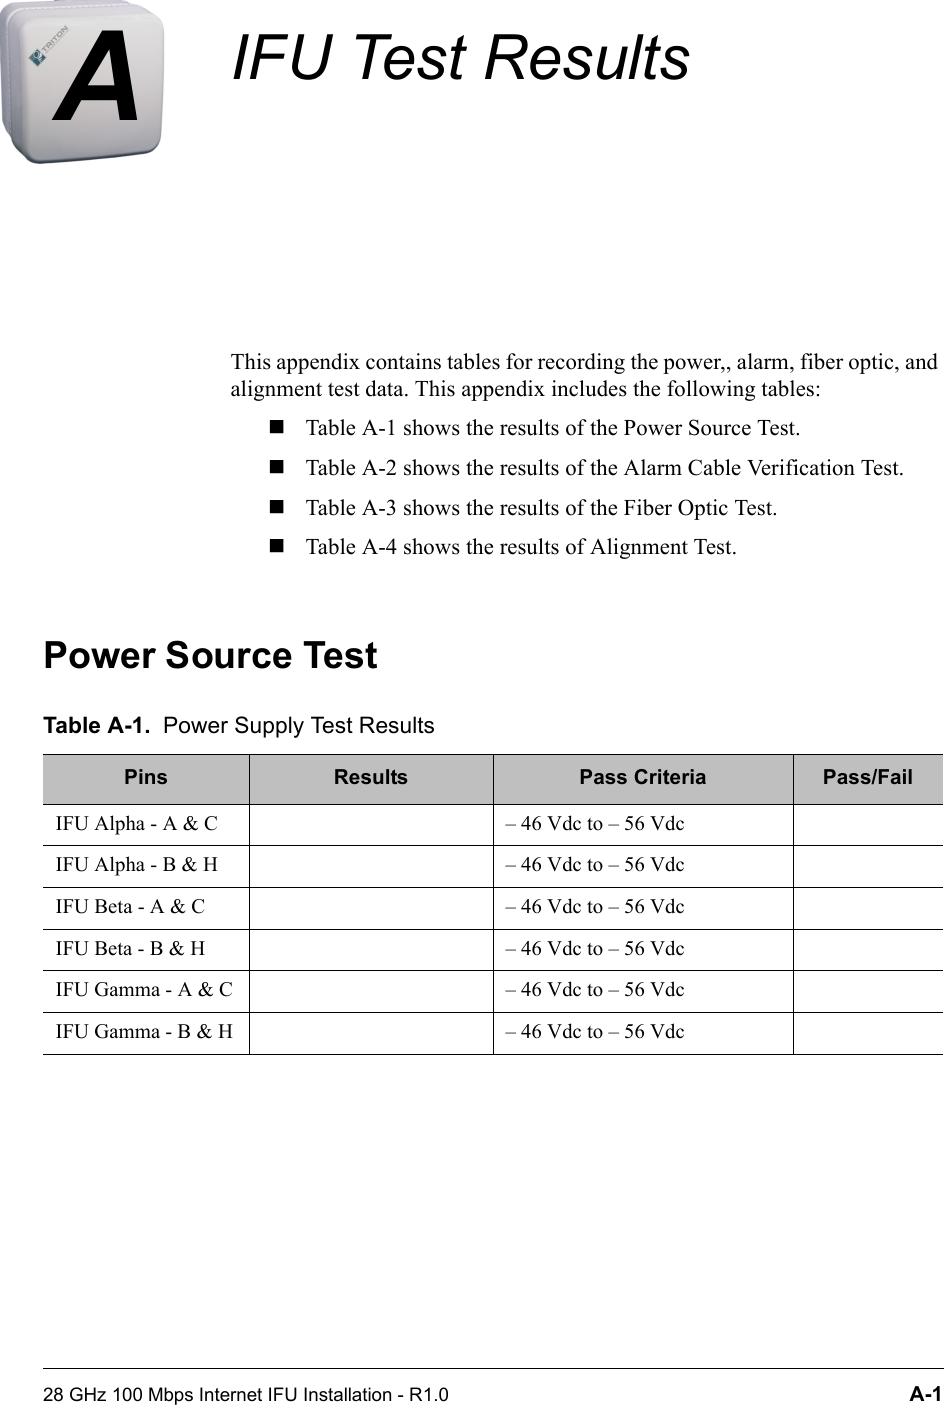 28 GHz 100 Mbps Internet IFU Installation - R1.0 A-1AIFU Test ResultsThis appendix contains tables for recording the power,, alarm, fiber optic, and alignment test data. This appendix includes the following tables:Table A-1 shows the results of the Power Source Test.Table A-2 shows the results of the Alarm Cable Verification Test.Table A-3 shows the results of the Fiber Optic Test.Table A-4 shows the results of Alignment Test.Power Source TestTable A-1. Power Supply Test ResultsPins Results Pass Criteria Pass/FailIFU Alpha - A &amp; C – 46 Vdc to – 56 VdcIFU Alpha - B &amp; H – 46 Vdc to – 56 VdcIFU Beta - A &amp; C – 46 Vdc to – 56 VdcIFU Beta - B &amp; H – 46 Vdc to – 56 VdcIFU Gamma - A &amp; C – 46 Vdc to – 56 VdcIFU Gamma - B &amp; H – 46 Vdc to – 56 Vdc